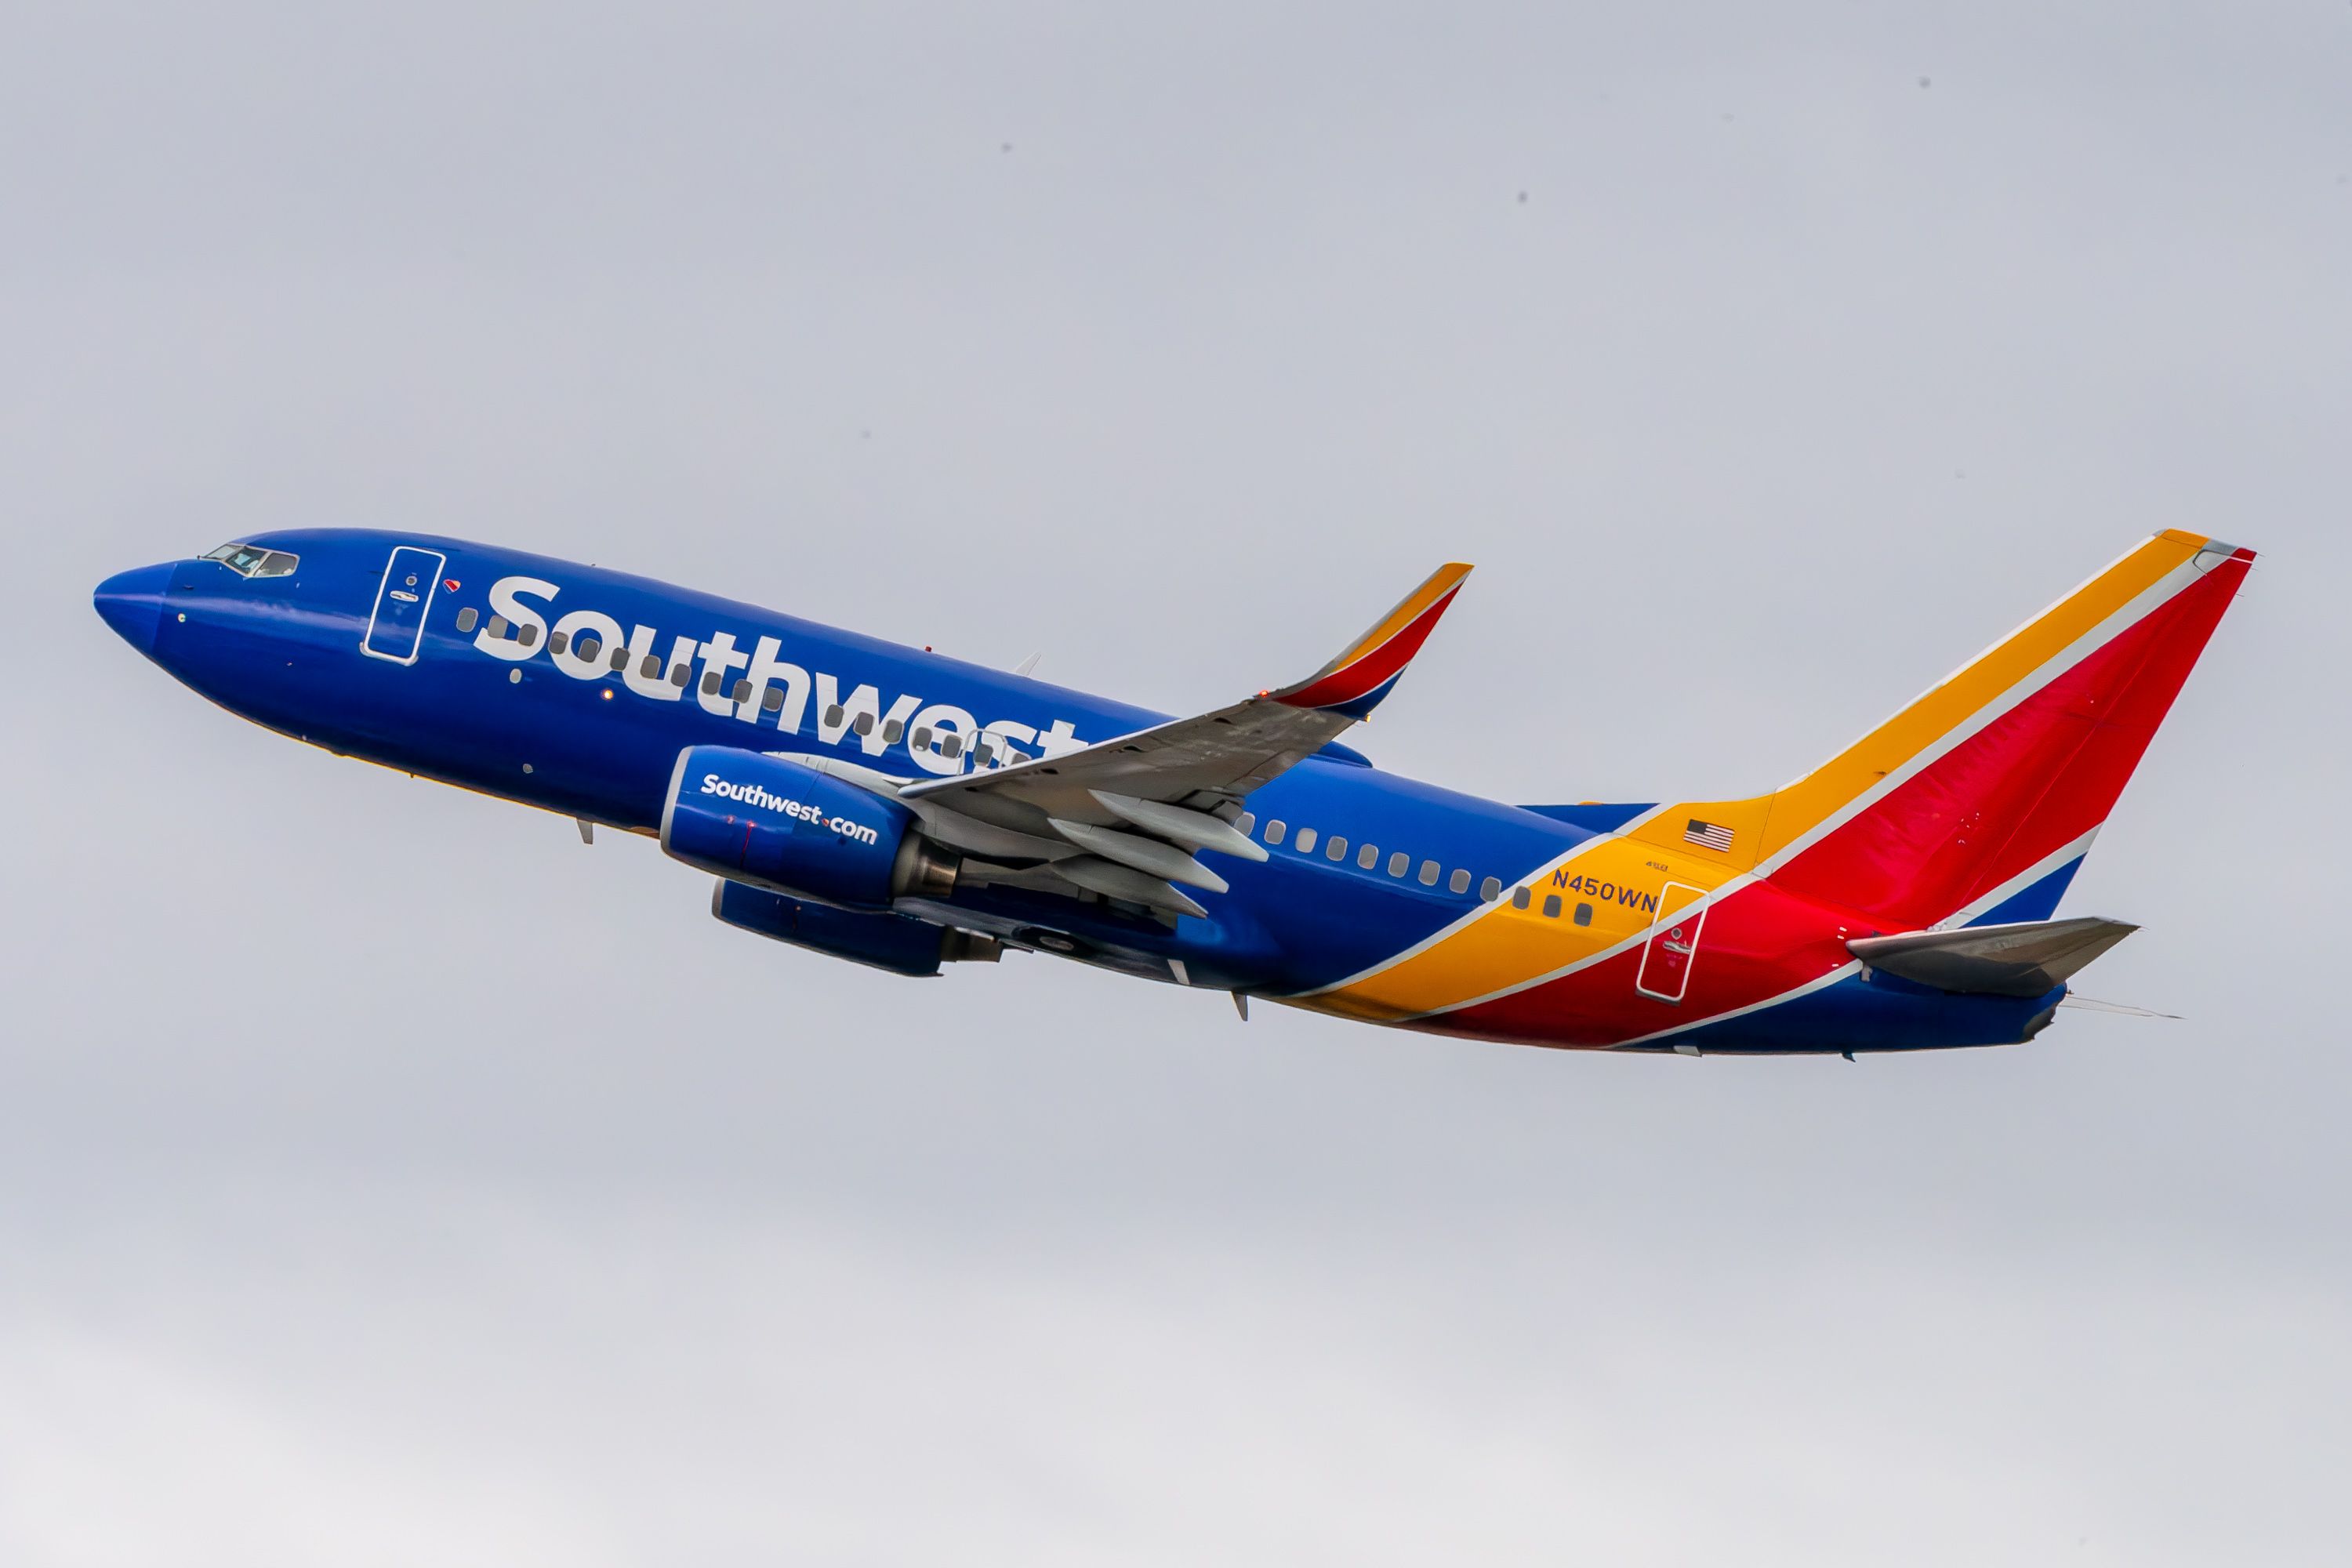 A Southwest Airlines 737-700 flying in the sky.